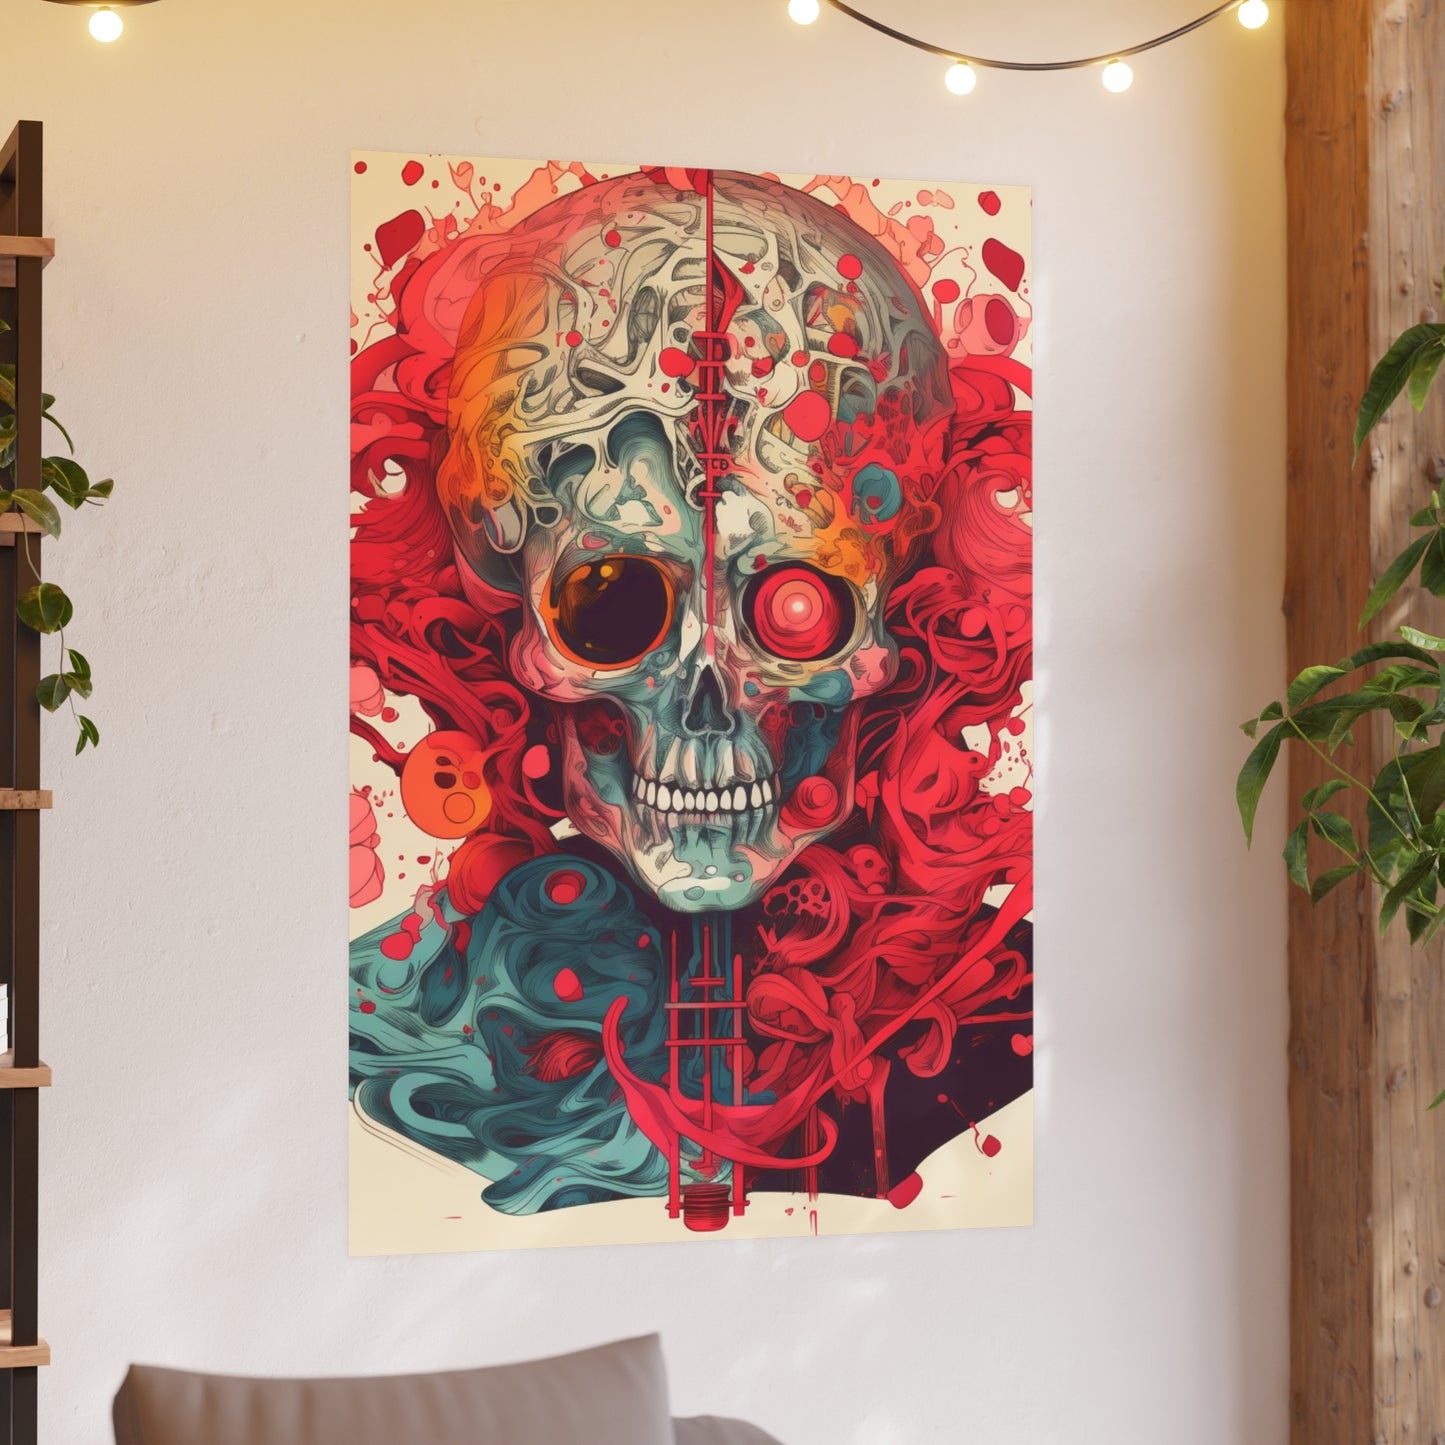 Unleash Power: Atomic Skull Poster for Bold Statements3